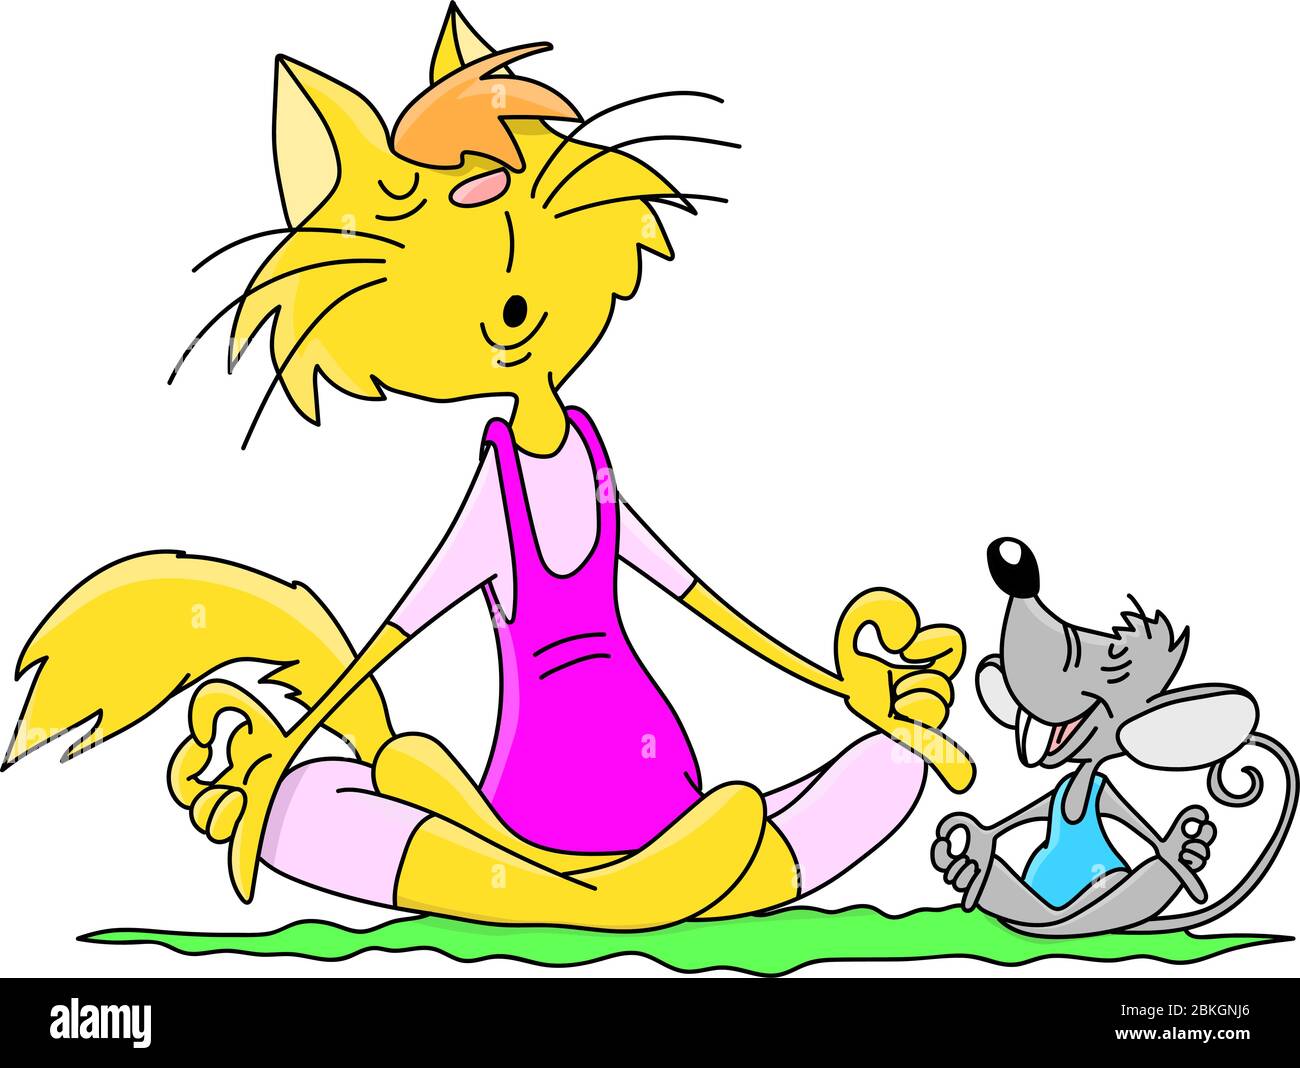 Cat And Mouse Cartoon High Resolution Stock Photography And Images Alamy